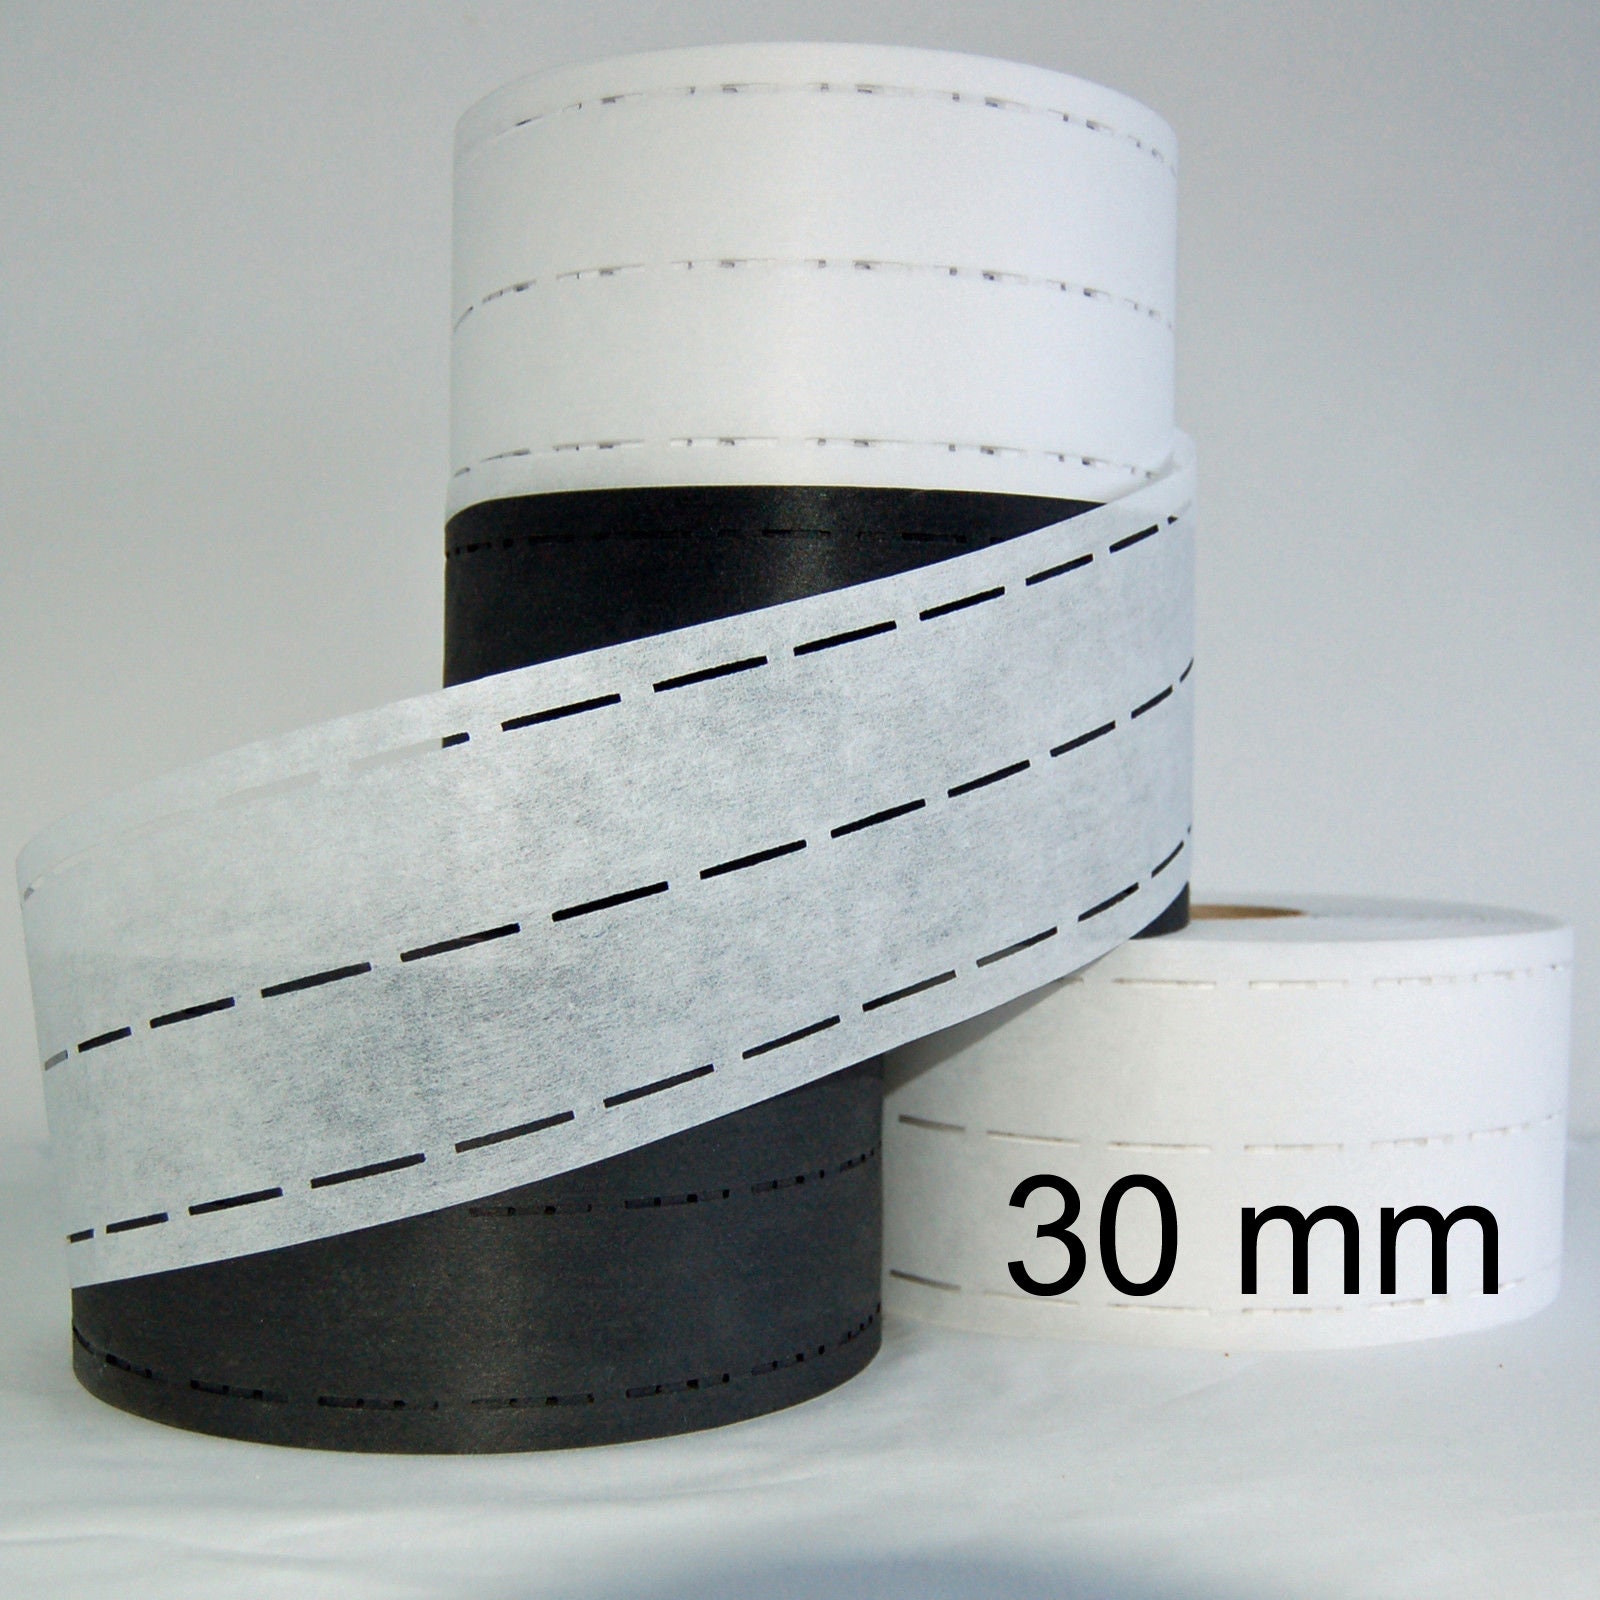 5 Meters of Fusible Tape, Ironing Tape Easy Seamless Hem WHITE / BLACK  Width of Your Choice: 10, 15, 20, 30, 40 Mm -  Ireland